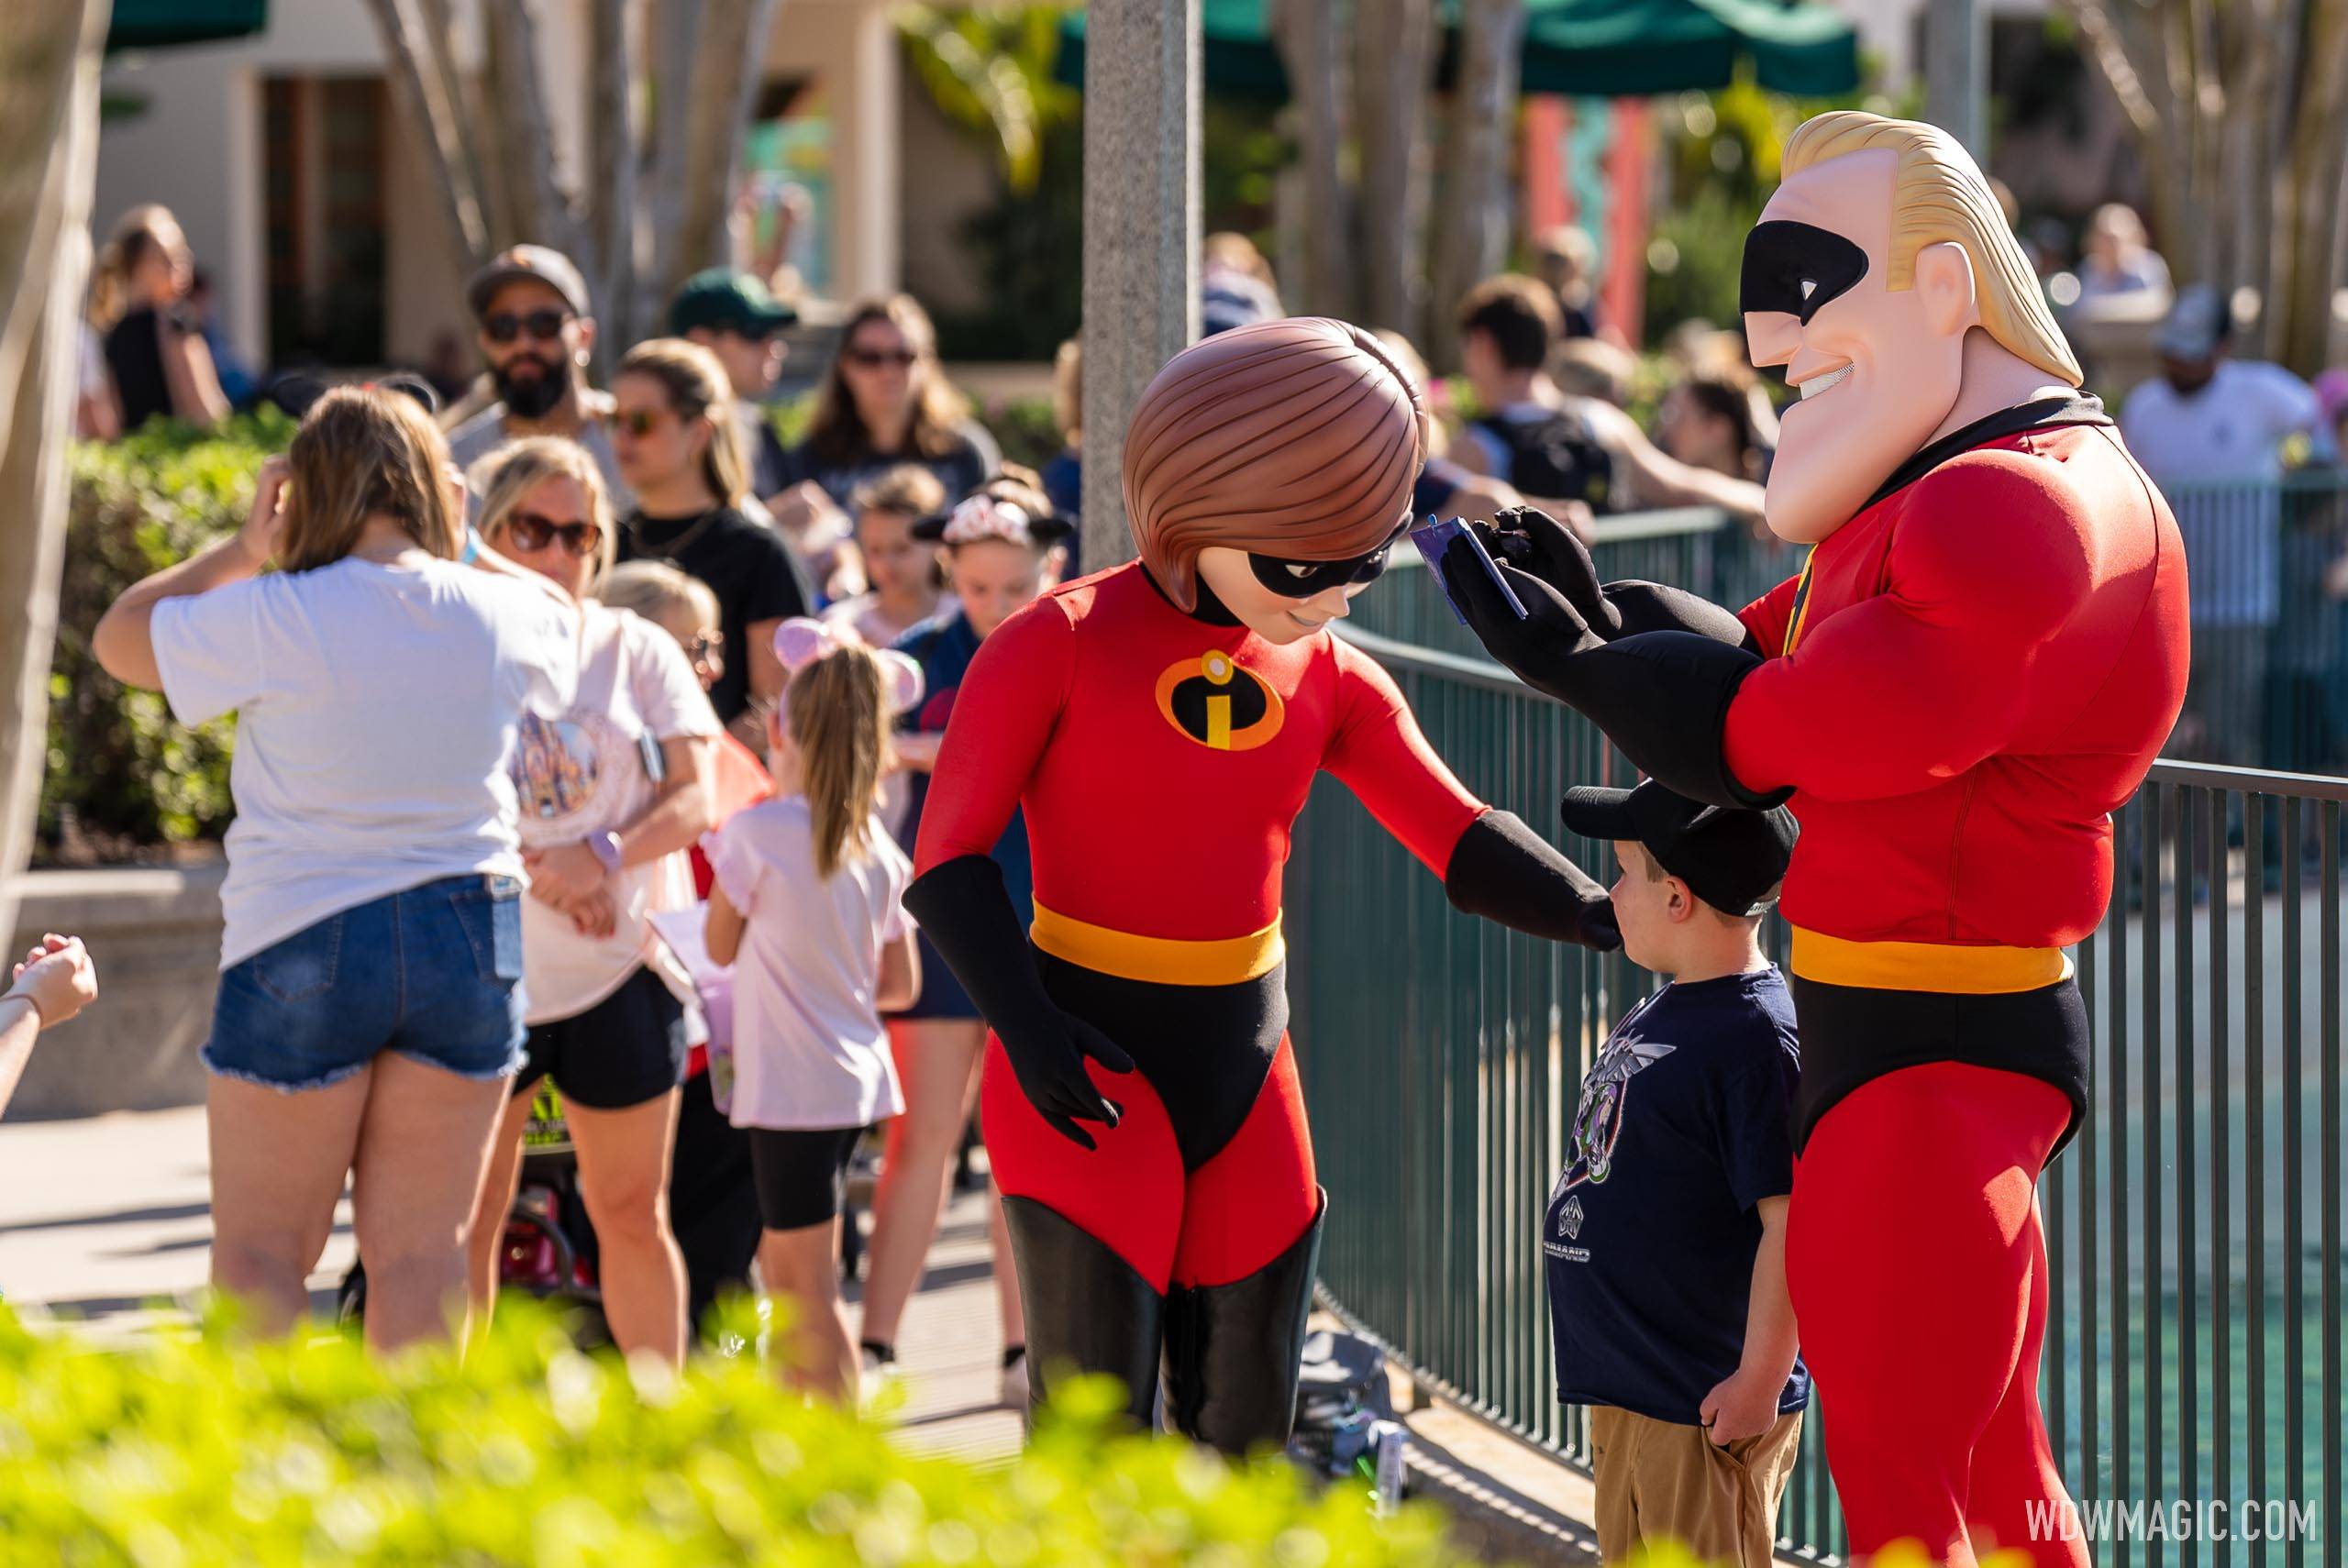 The Incredibles meet and greet